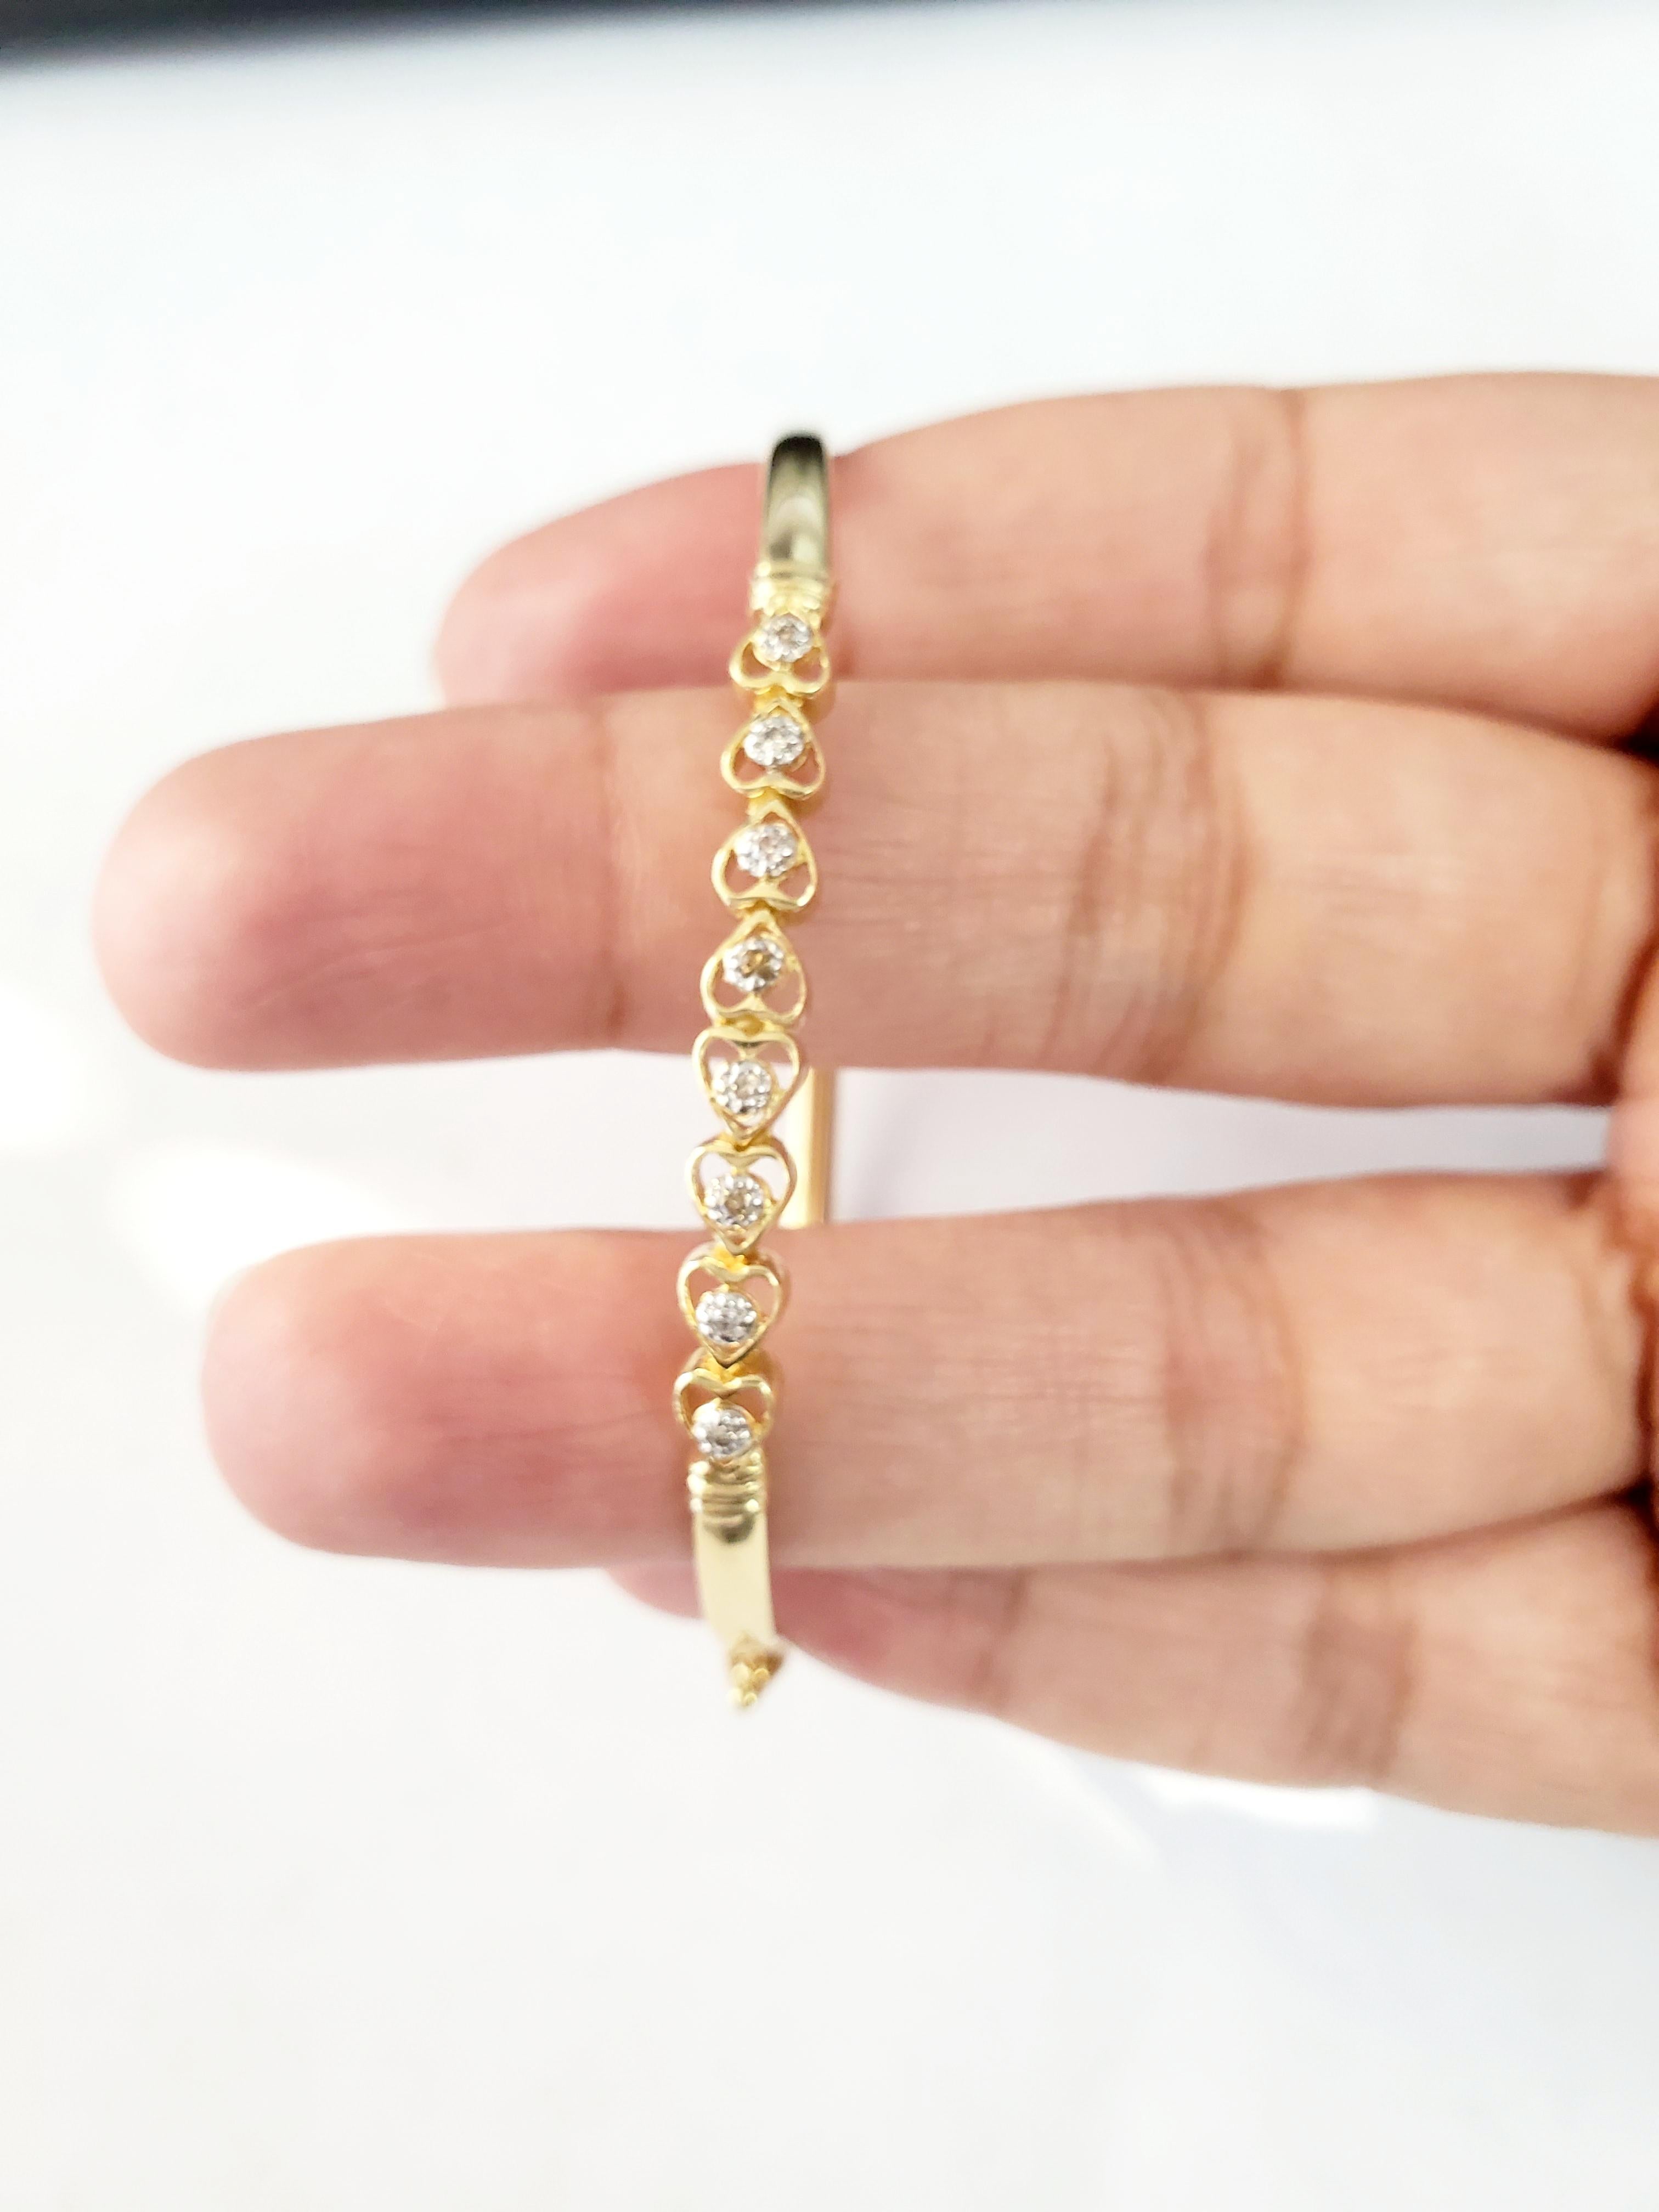 Heart Shaped Diamond Bangle 14k Yellow Gold In New Condition For Sale In Sugar Land, TX